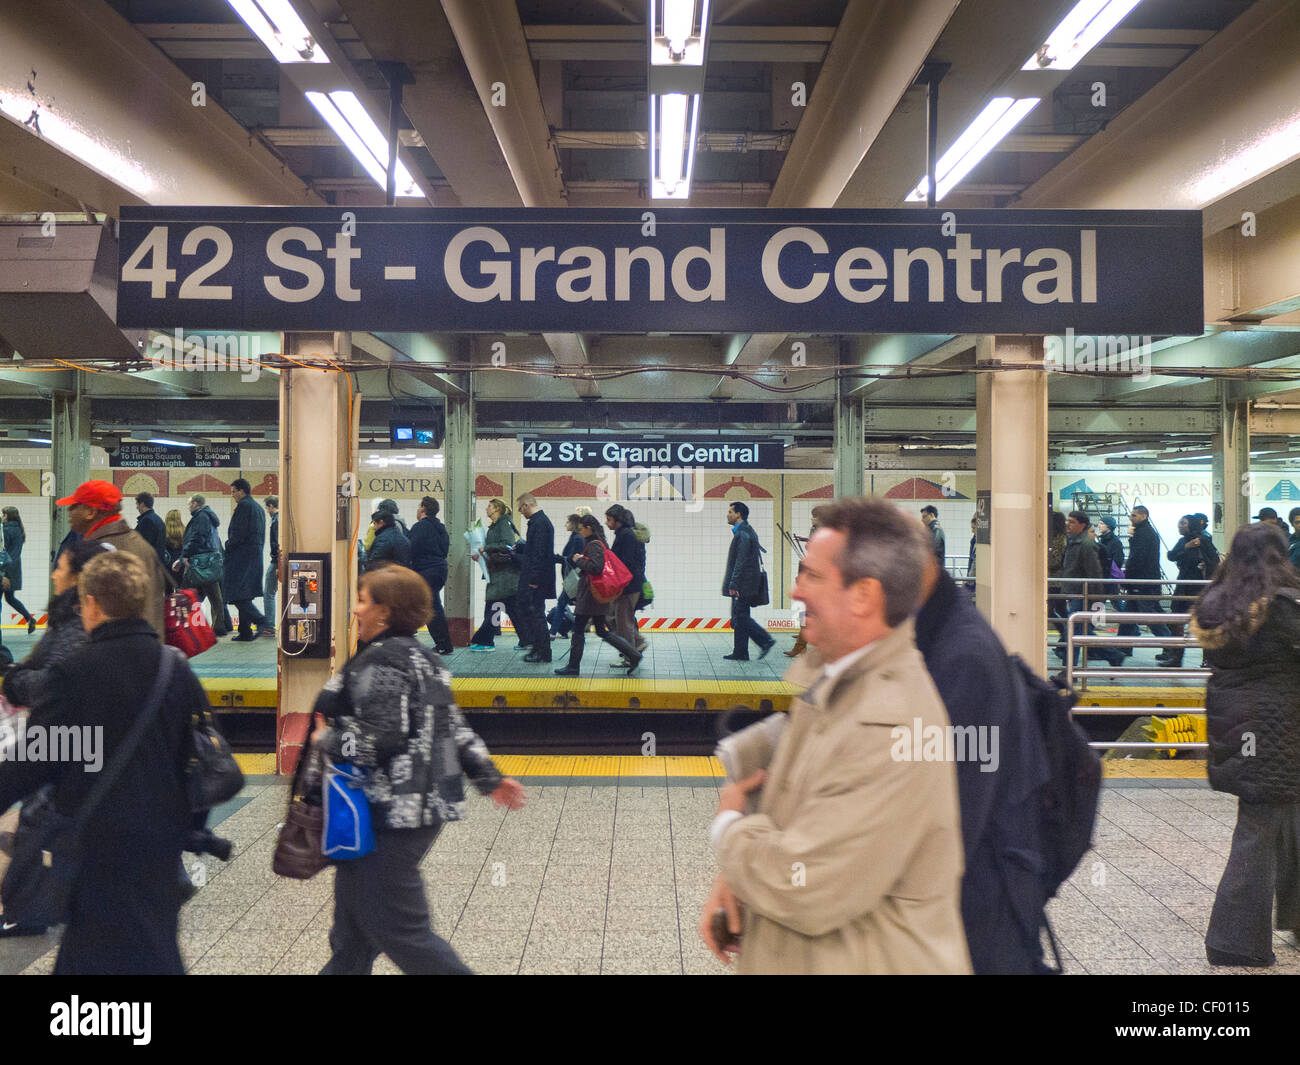 Grand central subway station in NYC Stock Photo